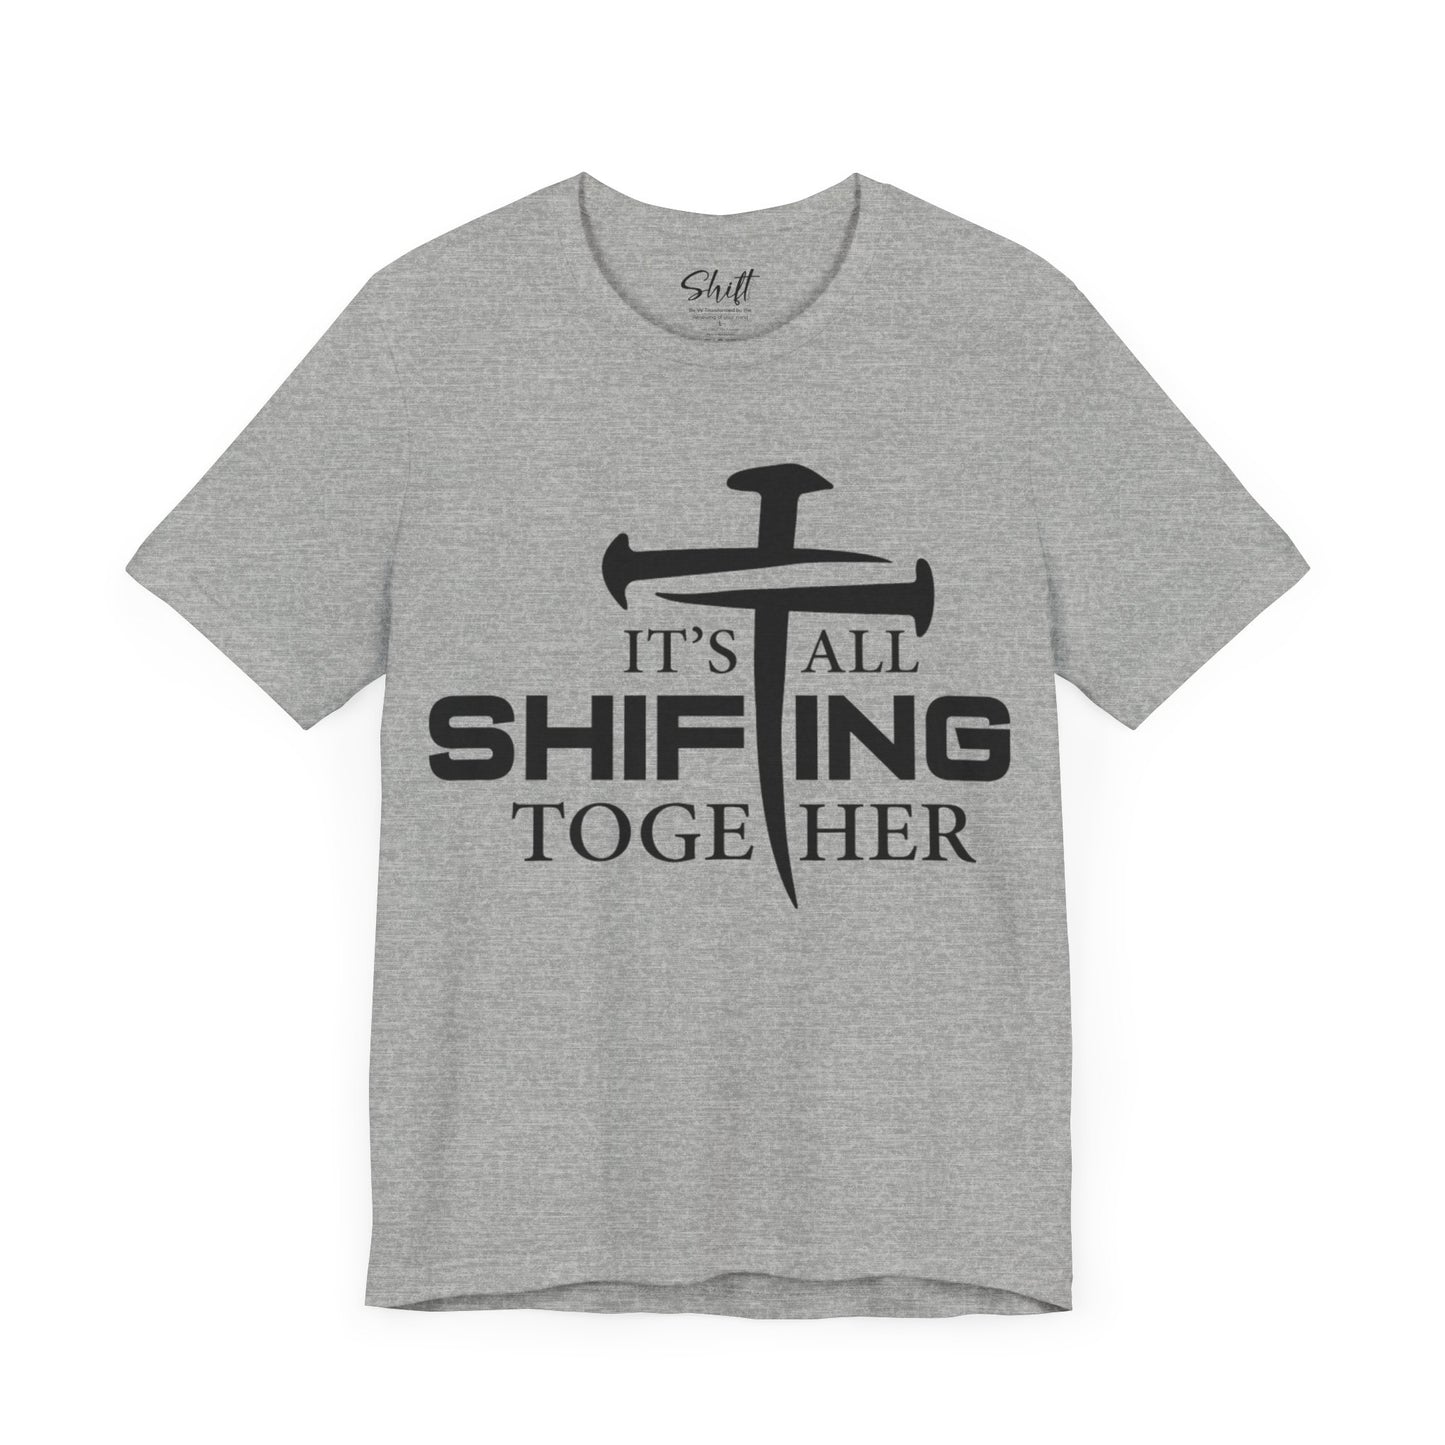 It's all shifting together Unisex Short Sleeve Tee black text